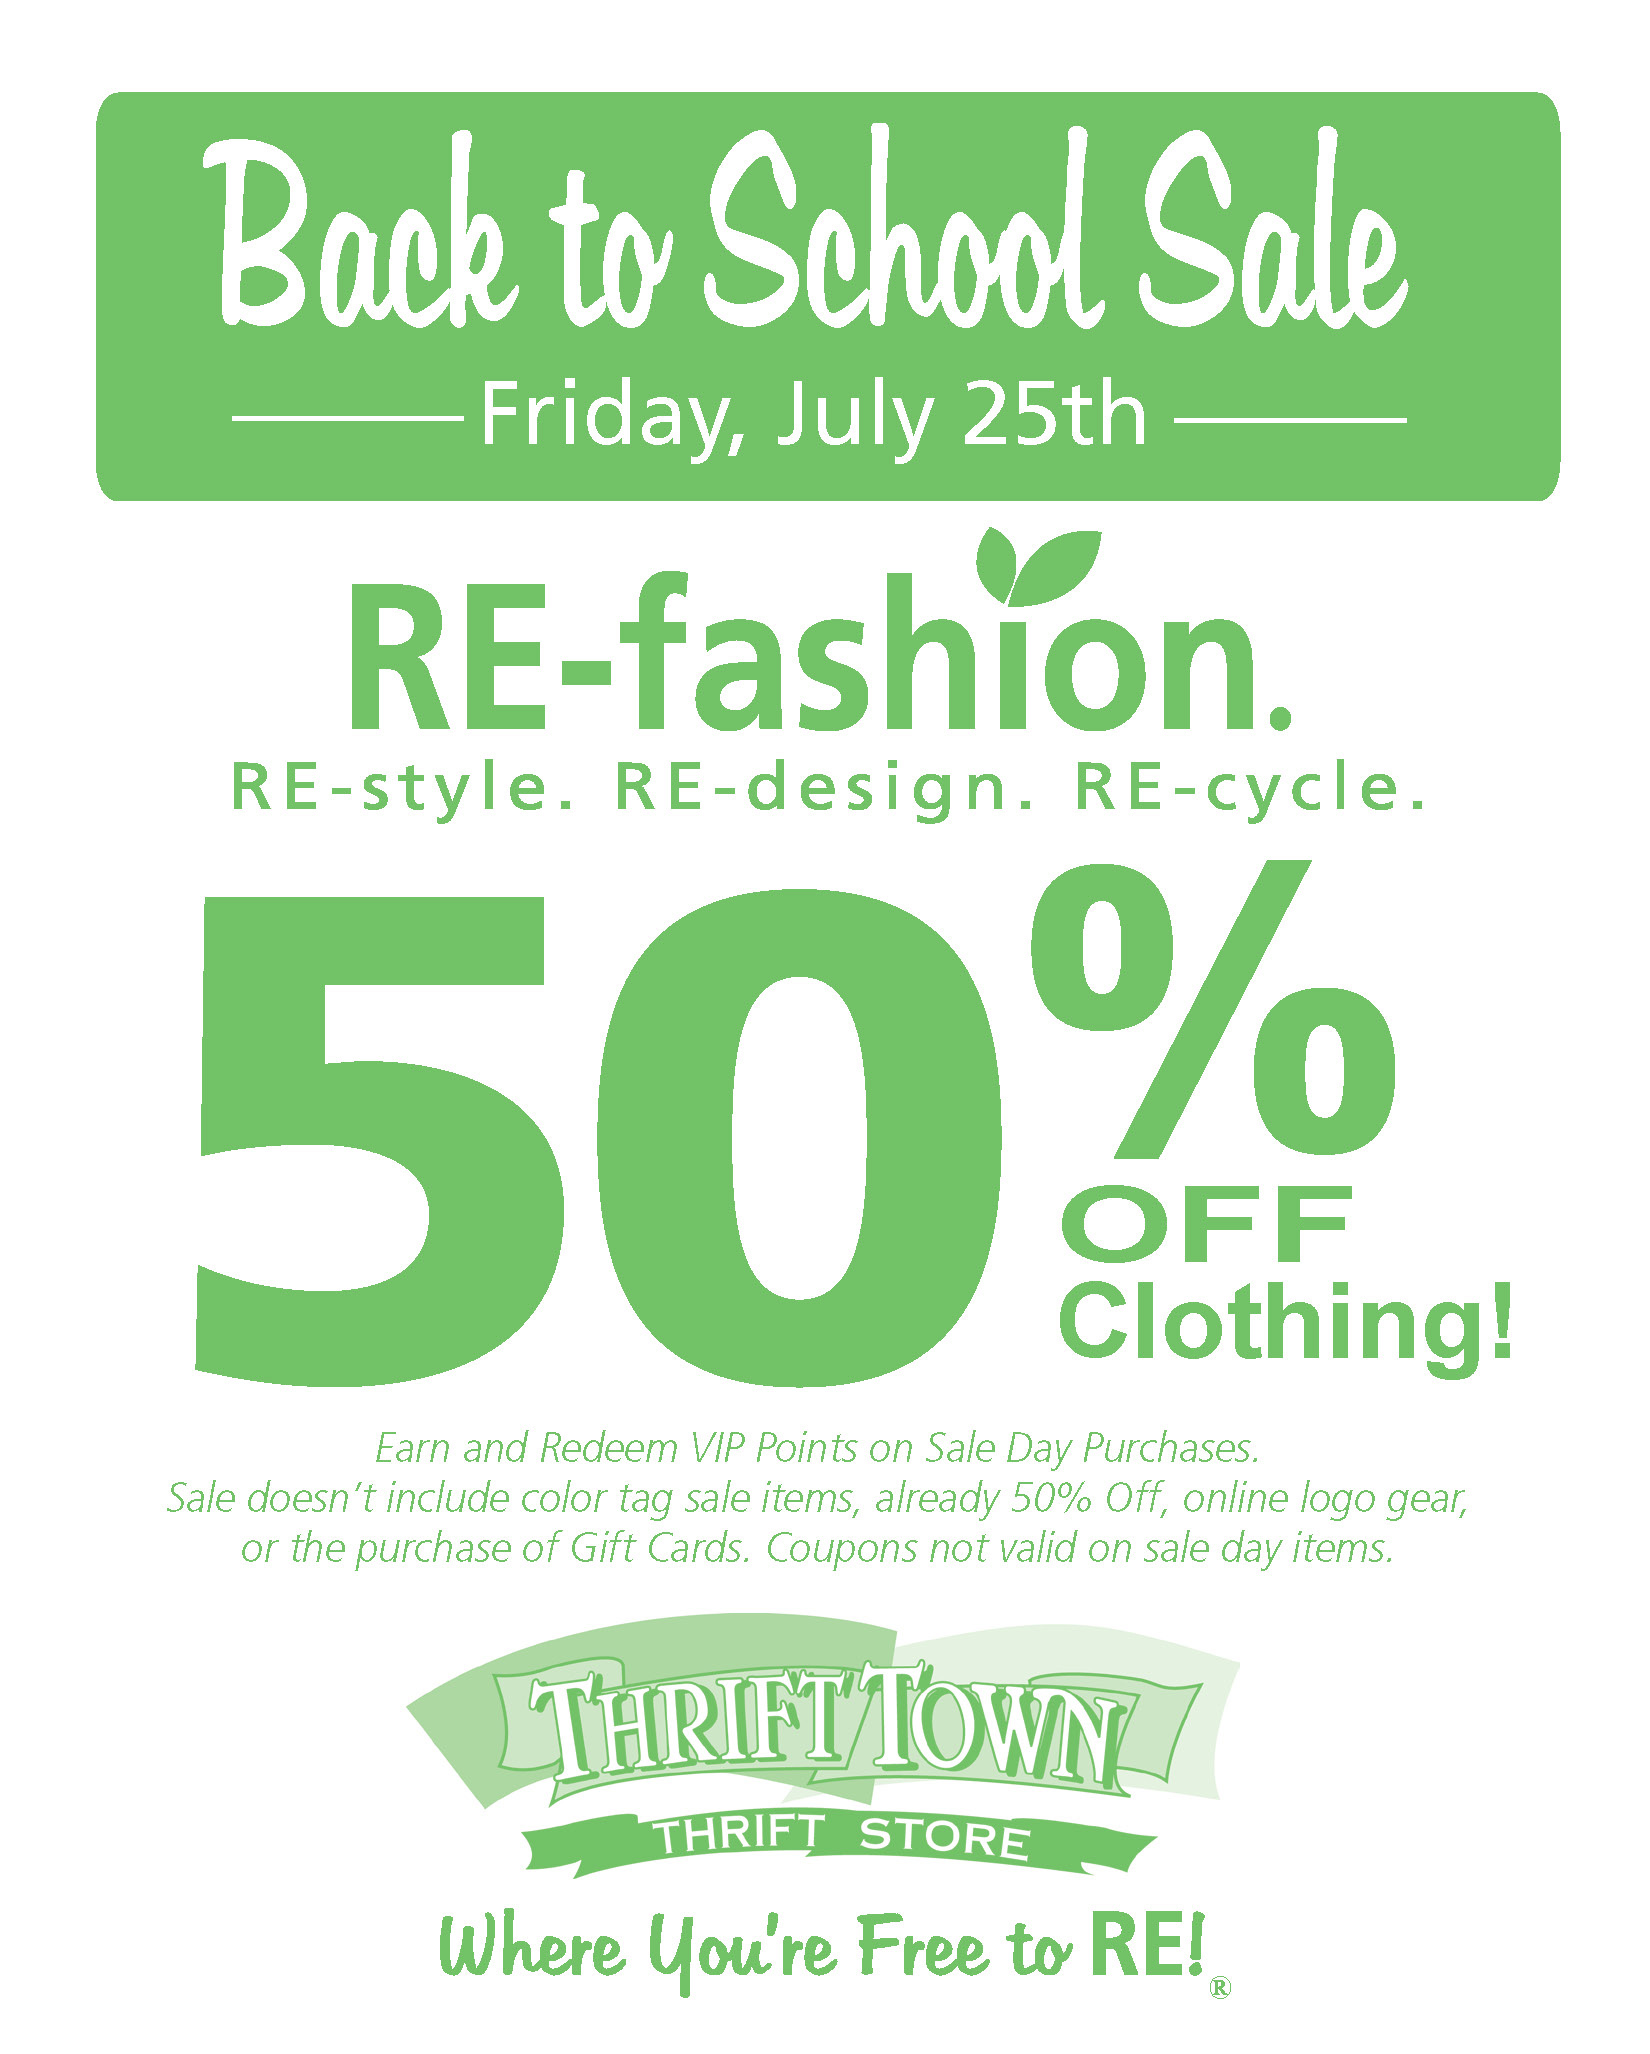 Thrift Town's Back to School Sale July 25th